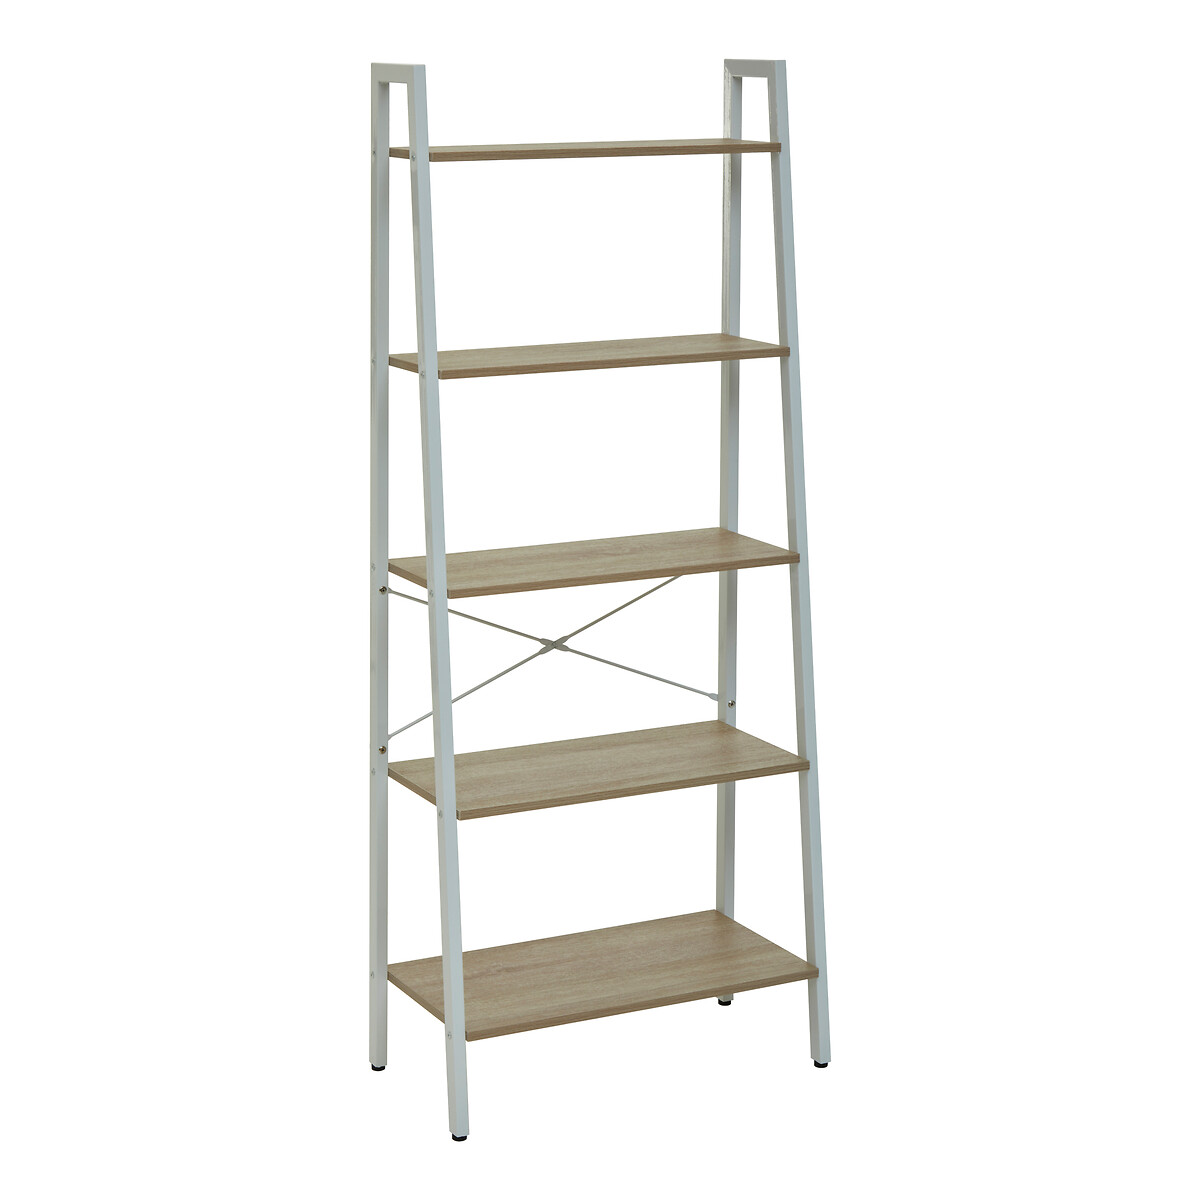 Industrial Style 5 Tier Ladder Shelf, White Industrial Style Shelving